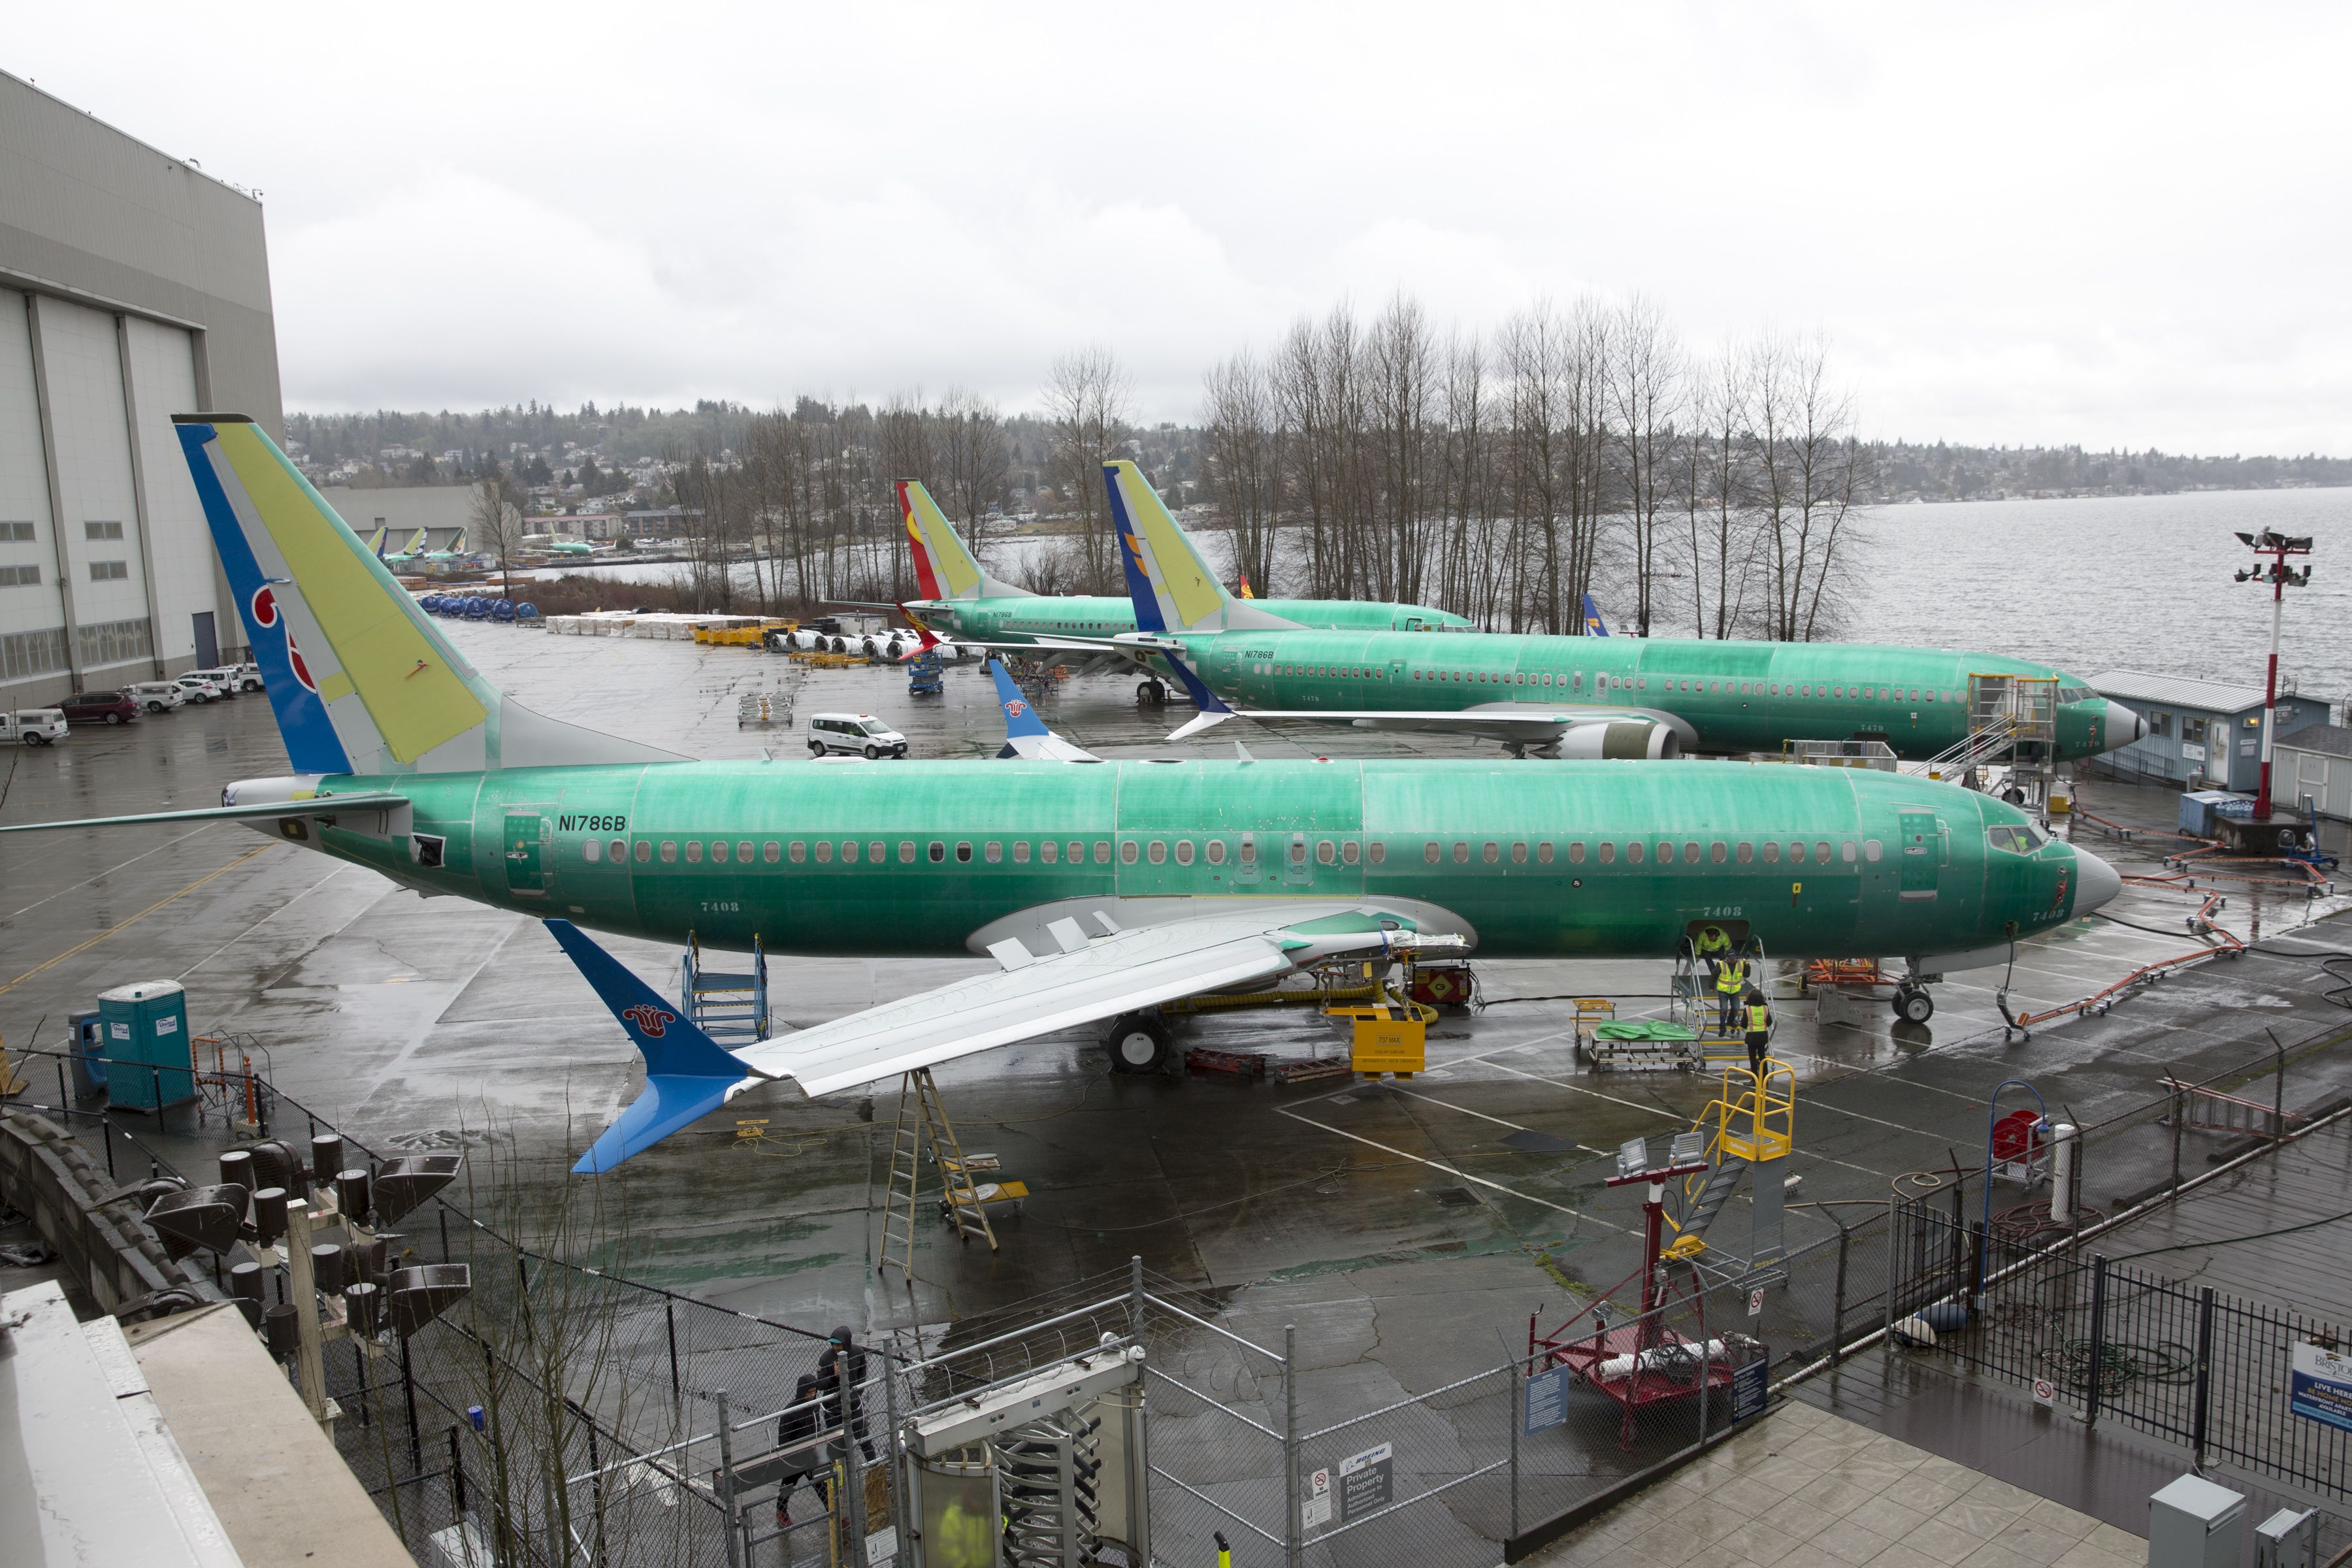 Boeing shares drop after FAA recently found another issue with 737 Max